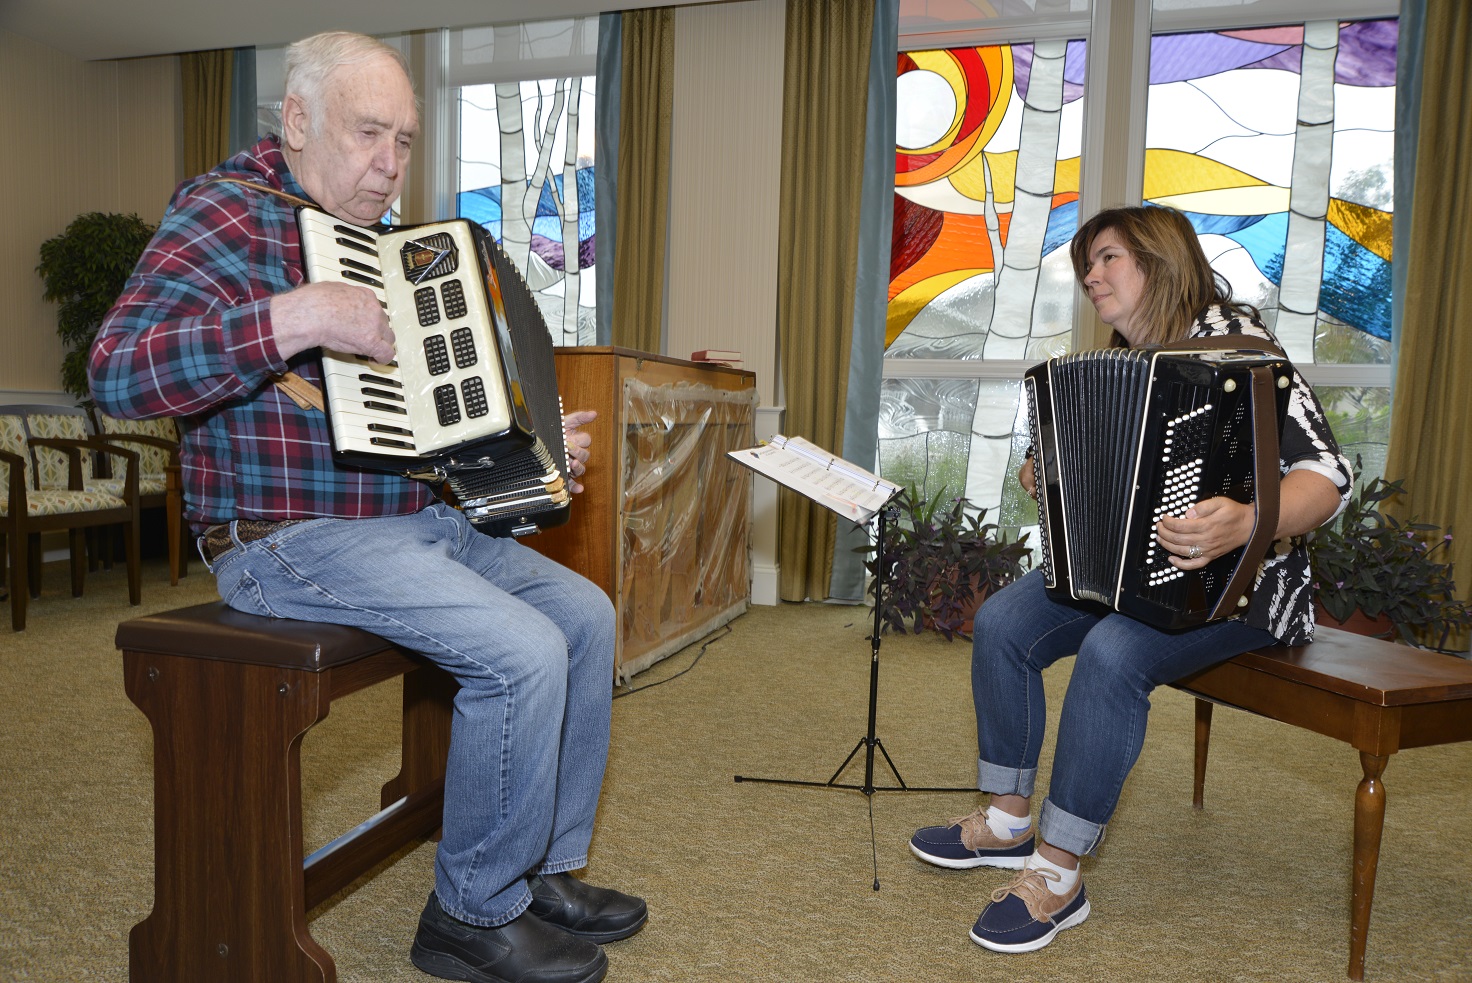 Natalia Osypenko has become Dale Hulston’s regular music partner. She says playing with Hulston reminds her of her grandparent’s love of music. Photo by Don Hall